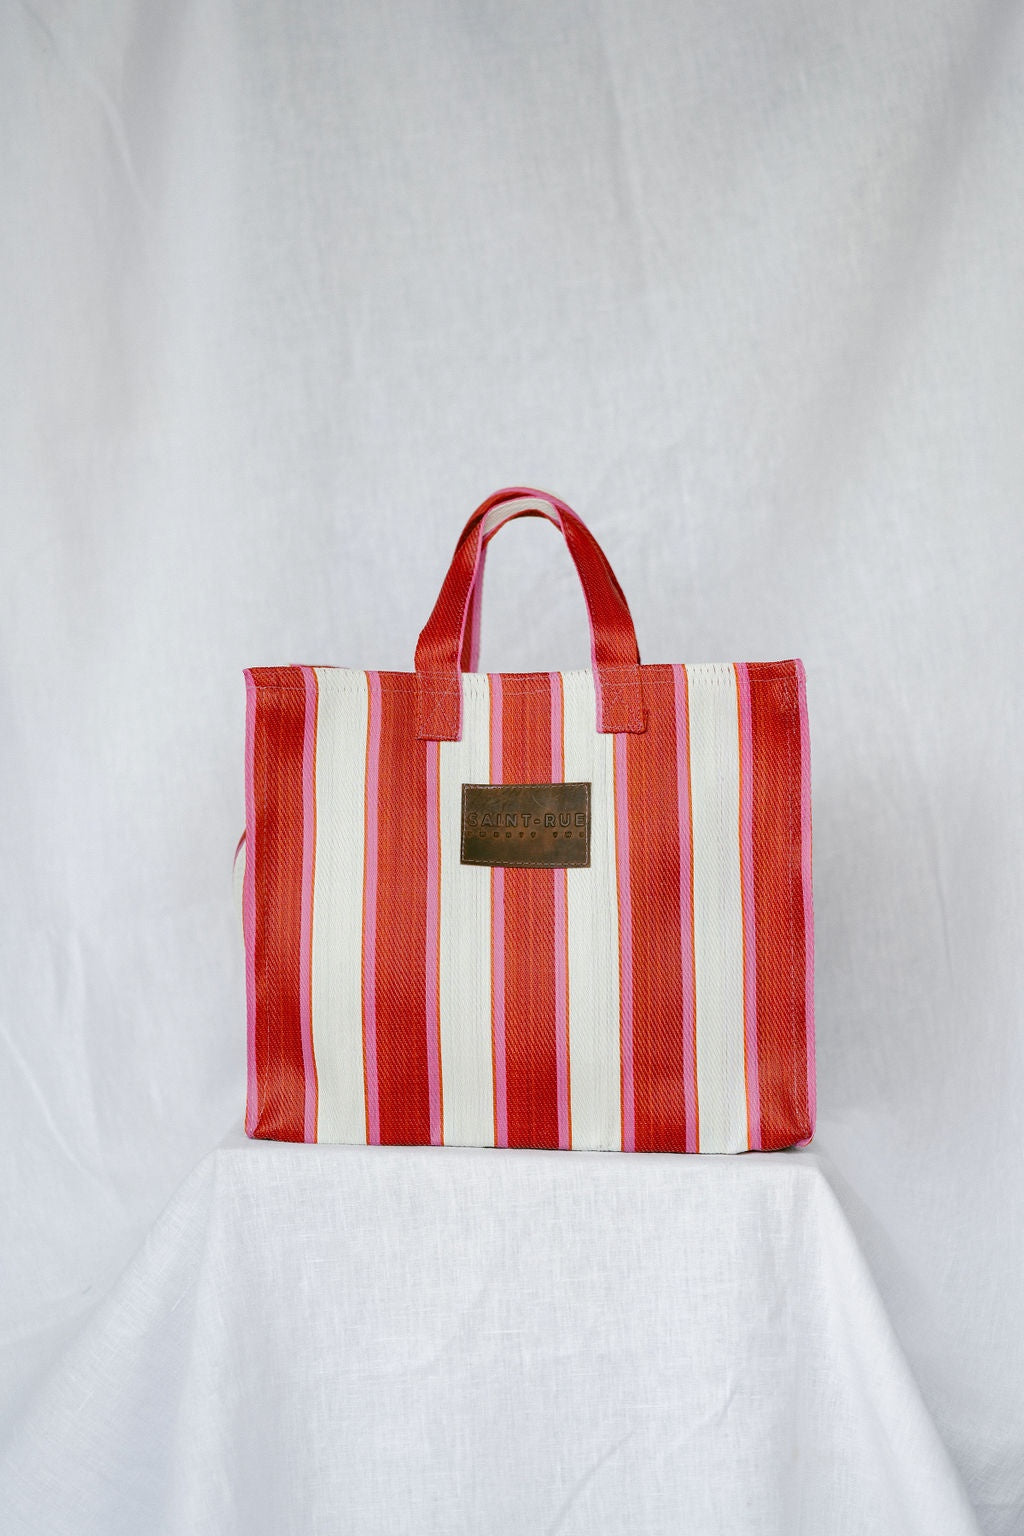 Saint Rue 22 Small Tote - Red, White and Pink